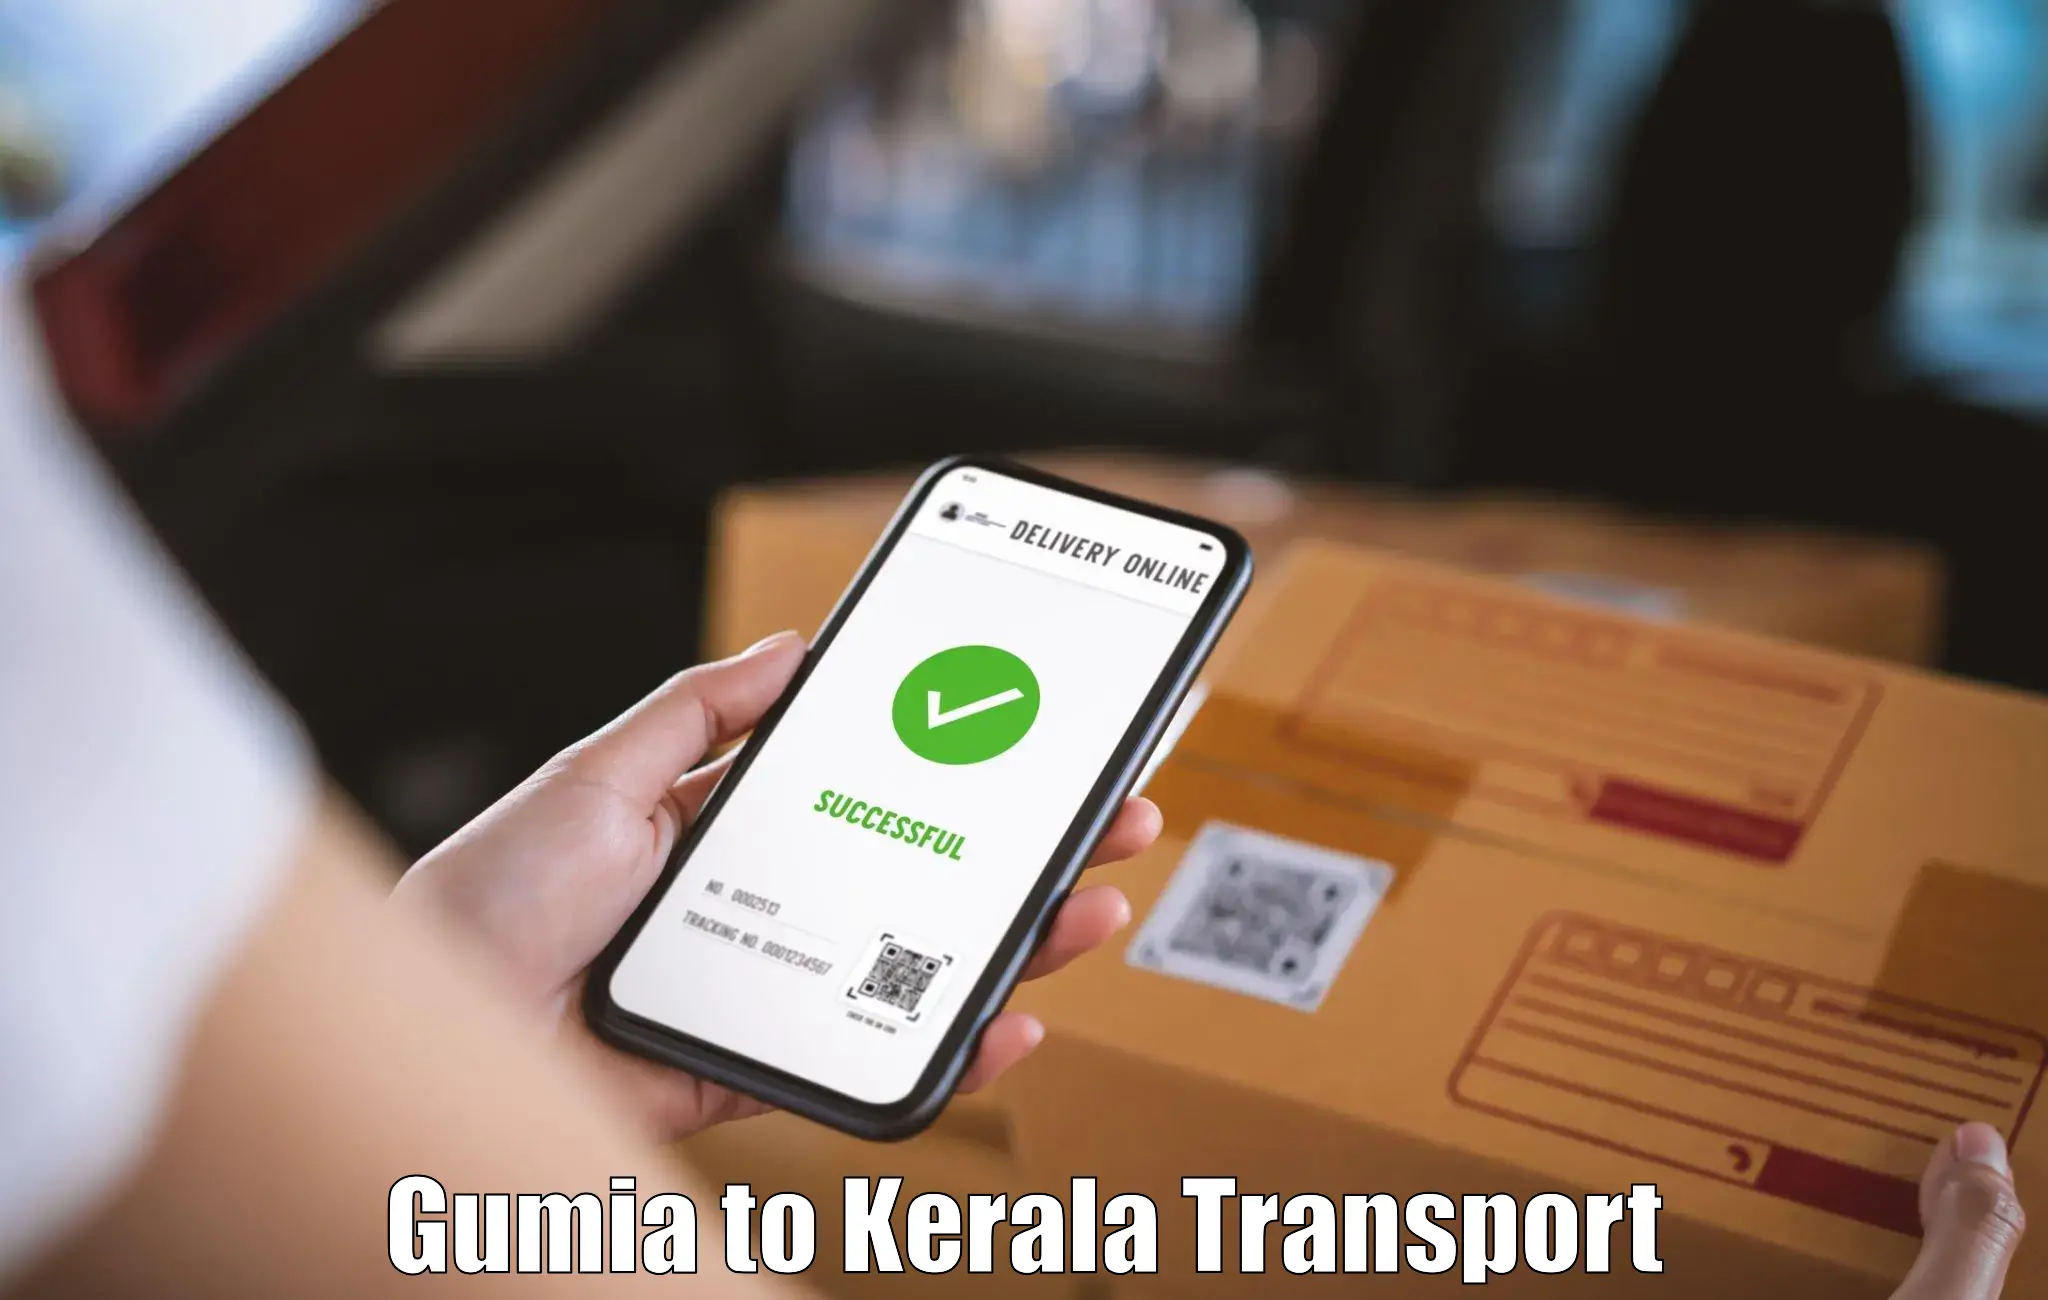 Parcel transport services Gumia to Taliparamba